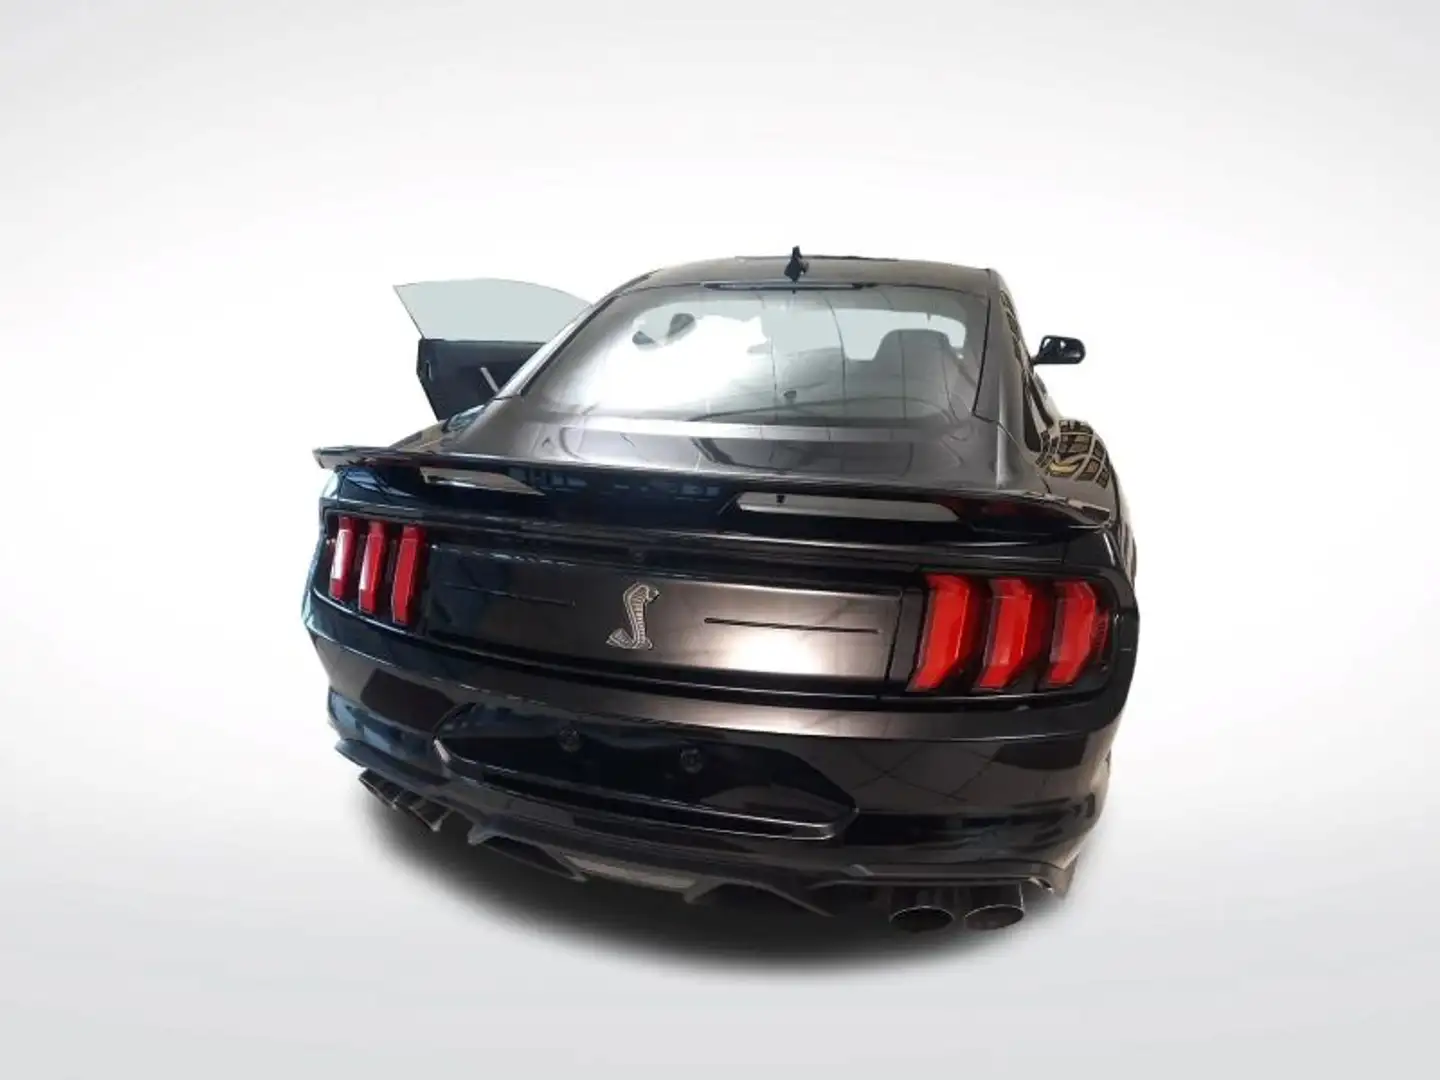 Ford Mustang Shelby GT500 FASTBACK - 2